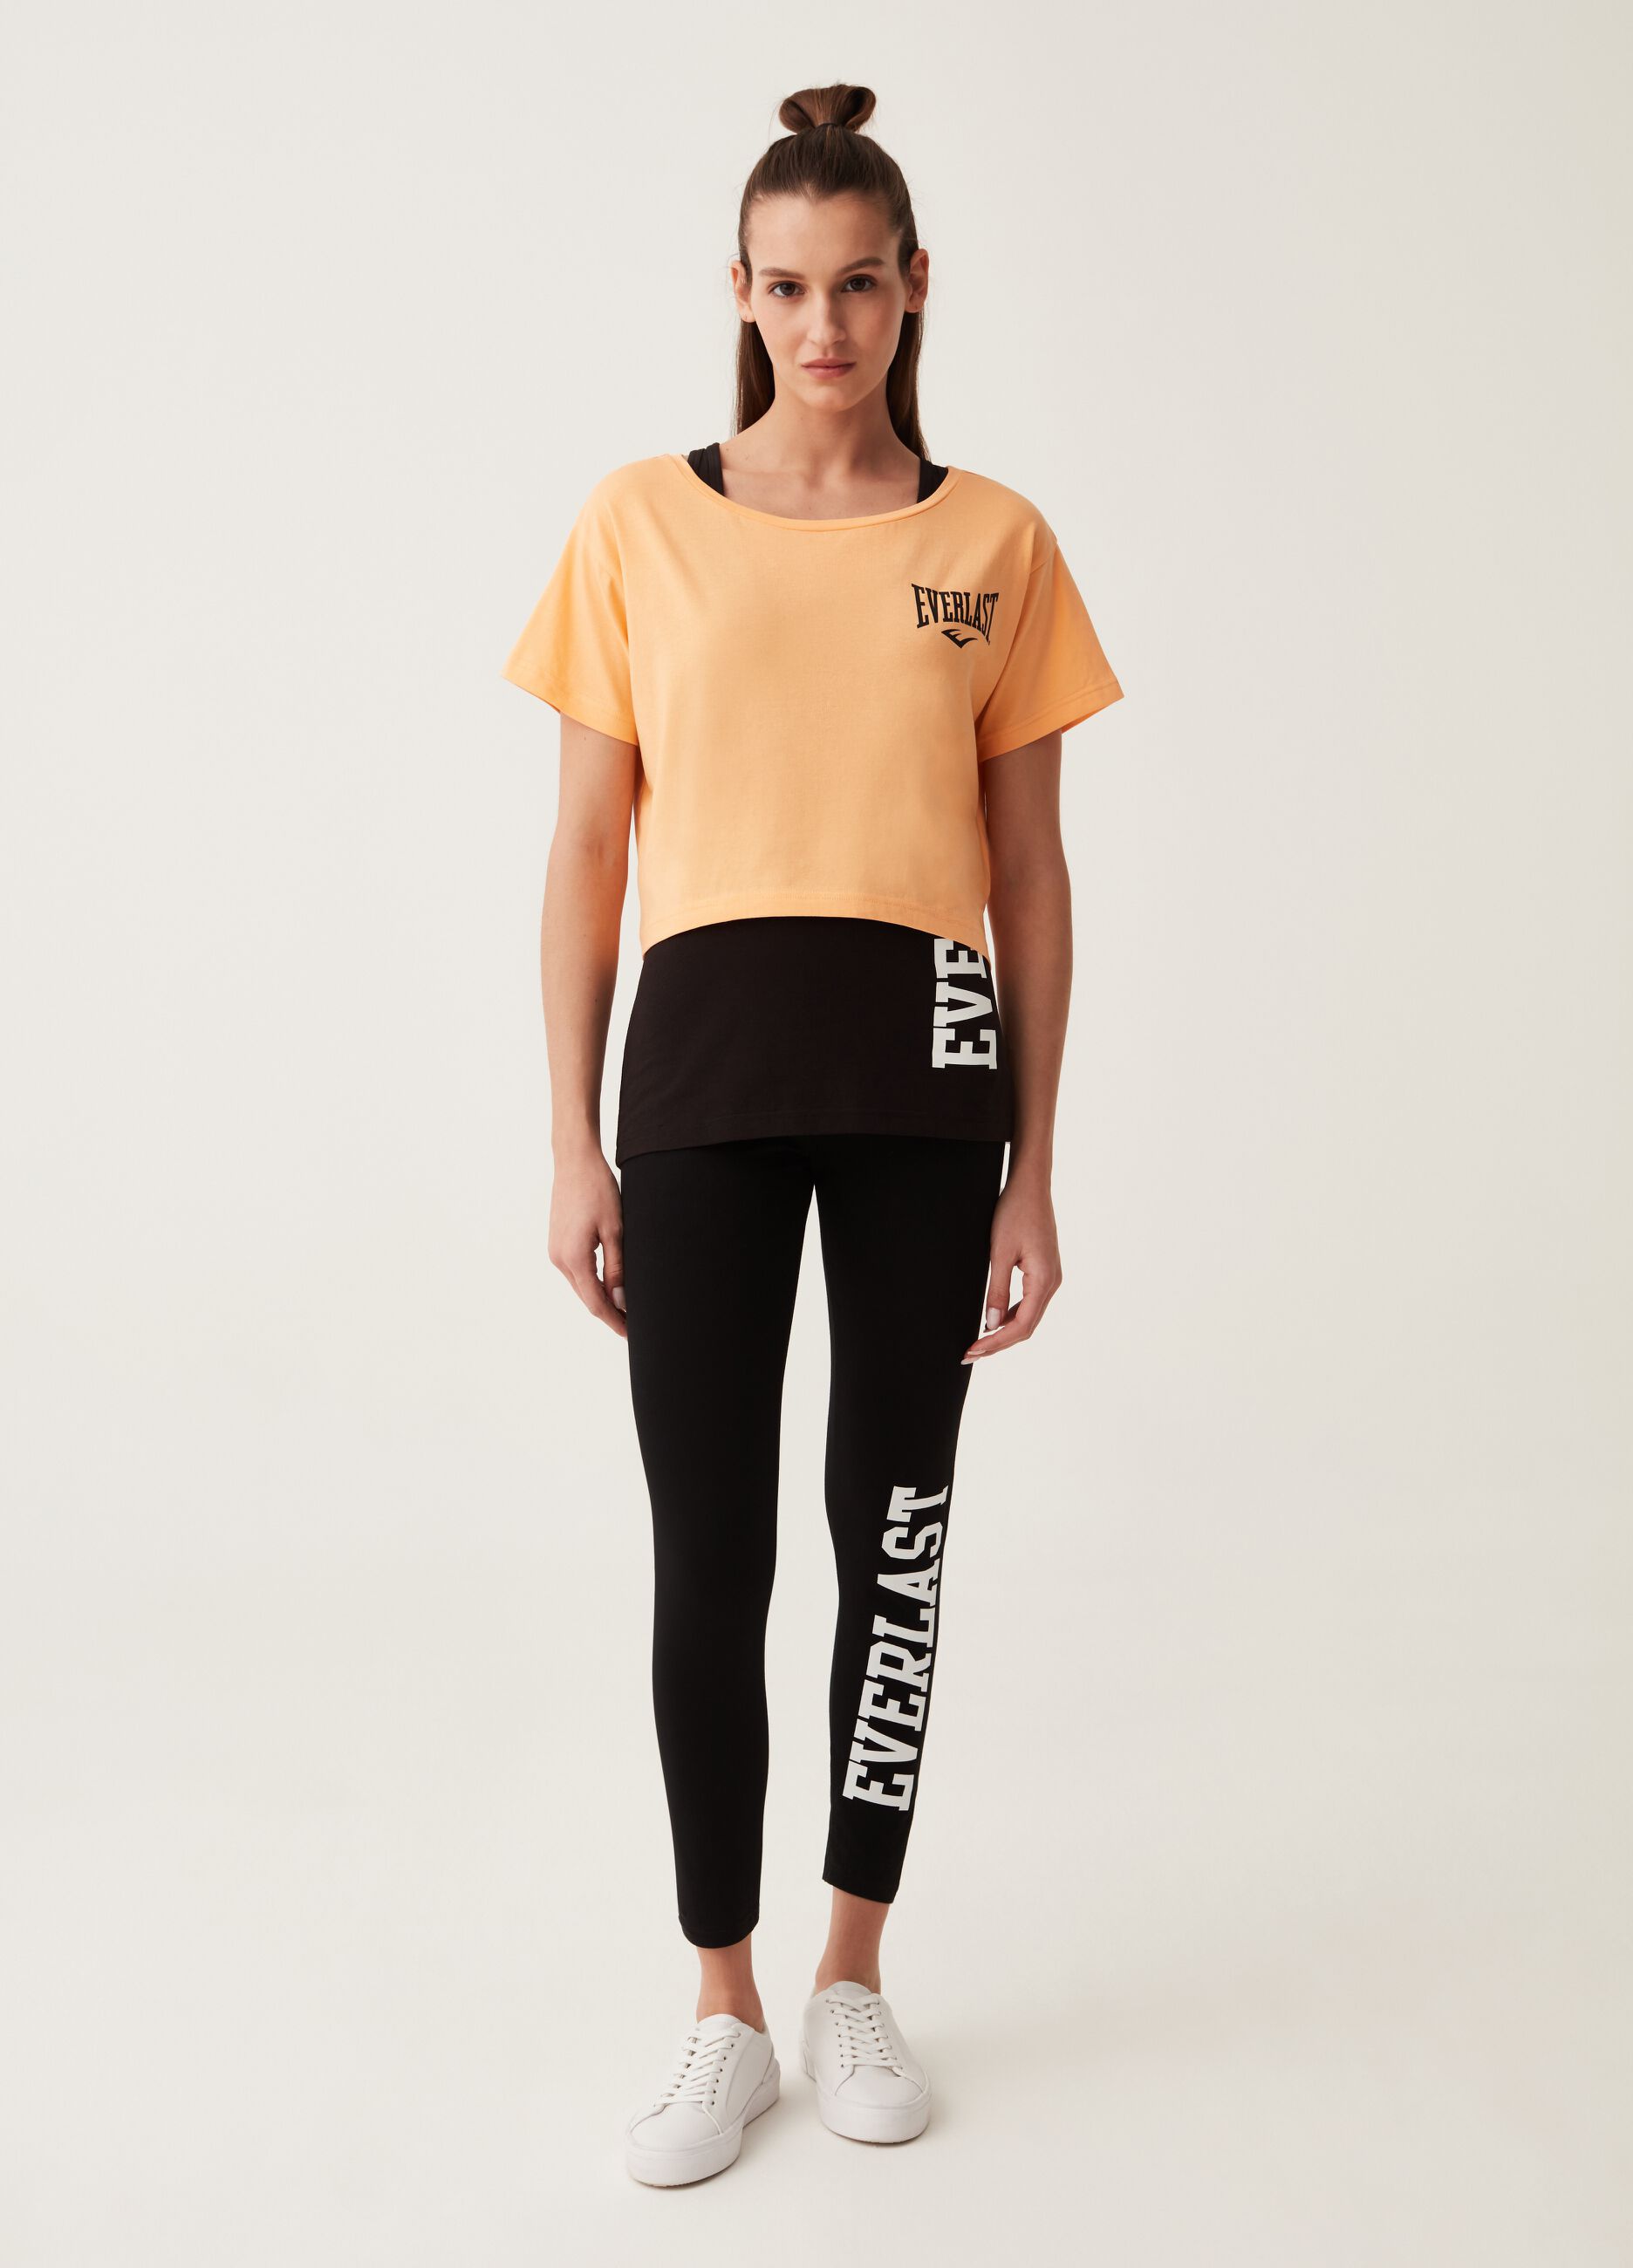 Stretch cotton T-shirt with Everlast print